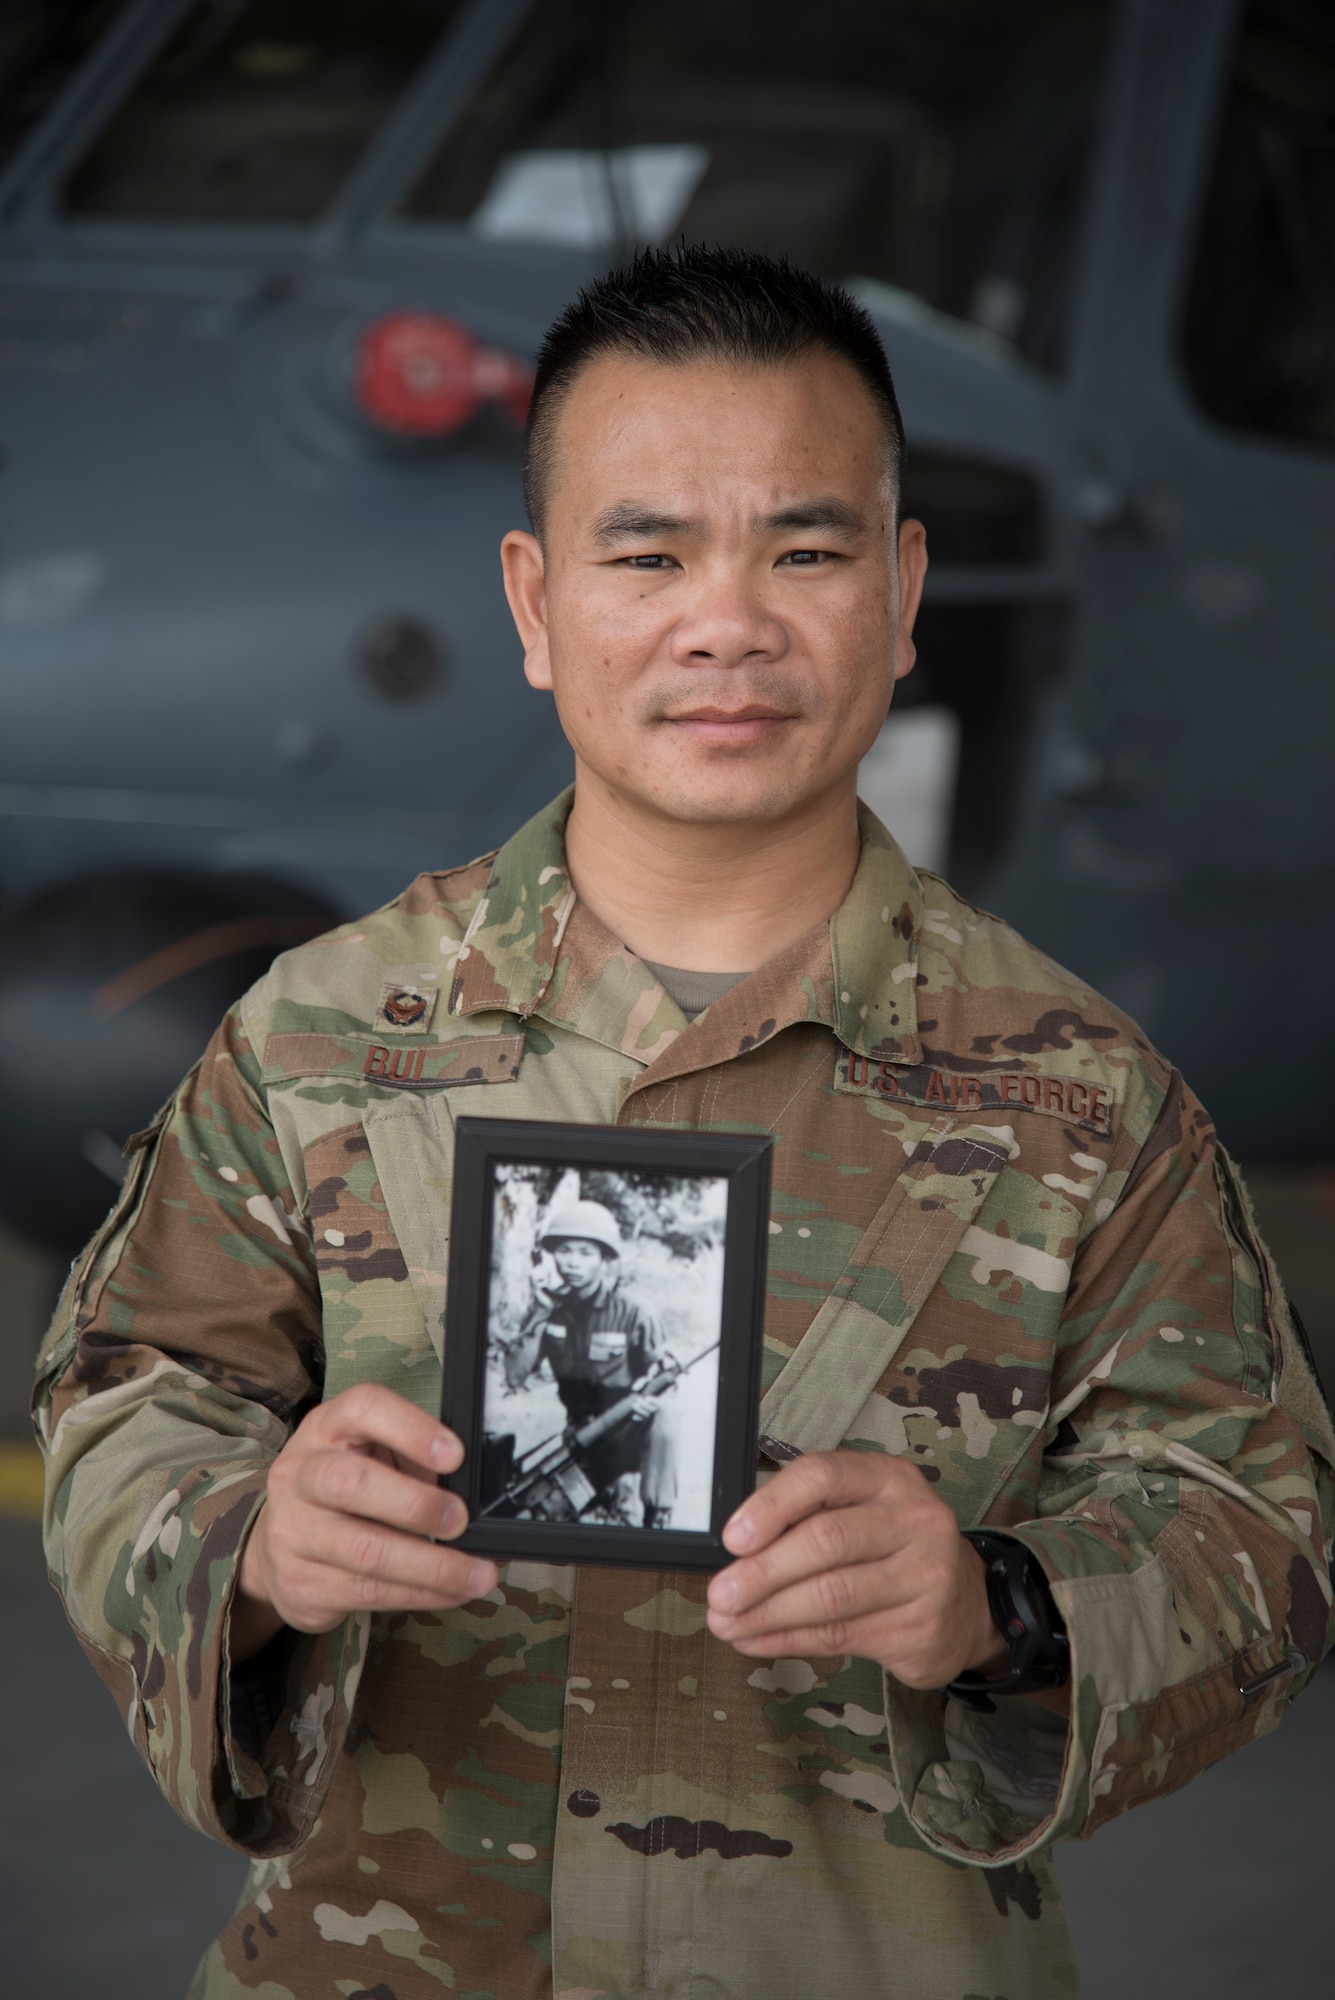 Lt. Col. Asan Bui, 920th Communications Flight commander, holds a photo of his late father, Chien Van Bui, while on duty at Patrick Air Force Base, Florida, on April 6, 2019. Bui said he has a lot of respect for his father who served in the South Vietnamese Army during the Vietnam War. The lieutenant colonel serves with the 920th Rescue Wing, a combat-search-and-rescue unit as part of the Air Force Reserve. (U.S. Air Force photo by Senior Airman Brandon Kalloo Sanes)